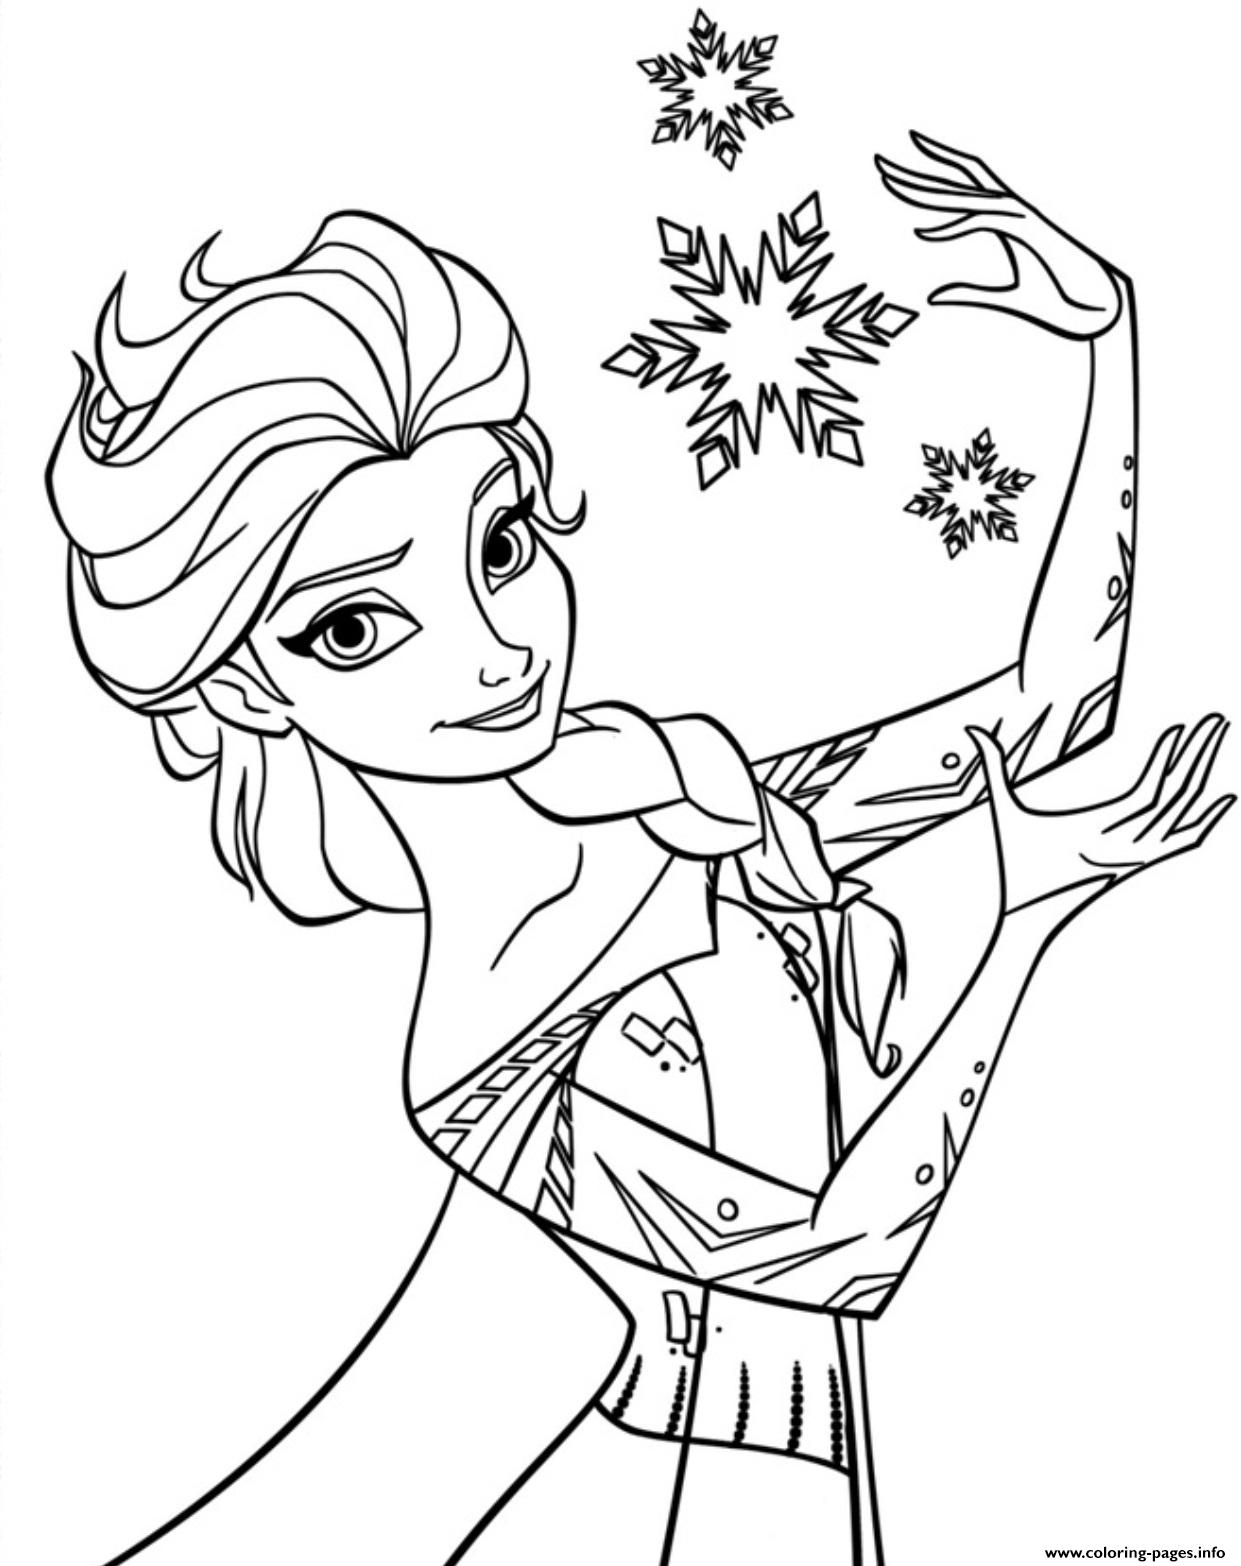 Frozen 2 Coloring Pages at Free printable colorings